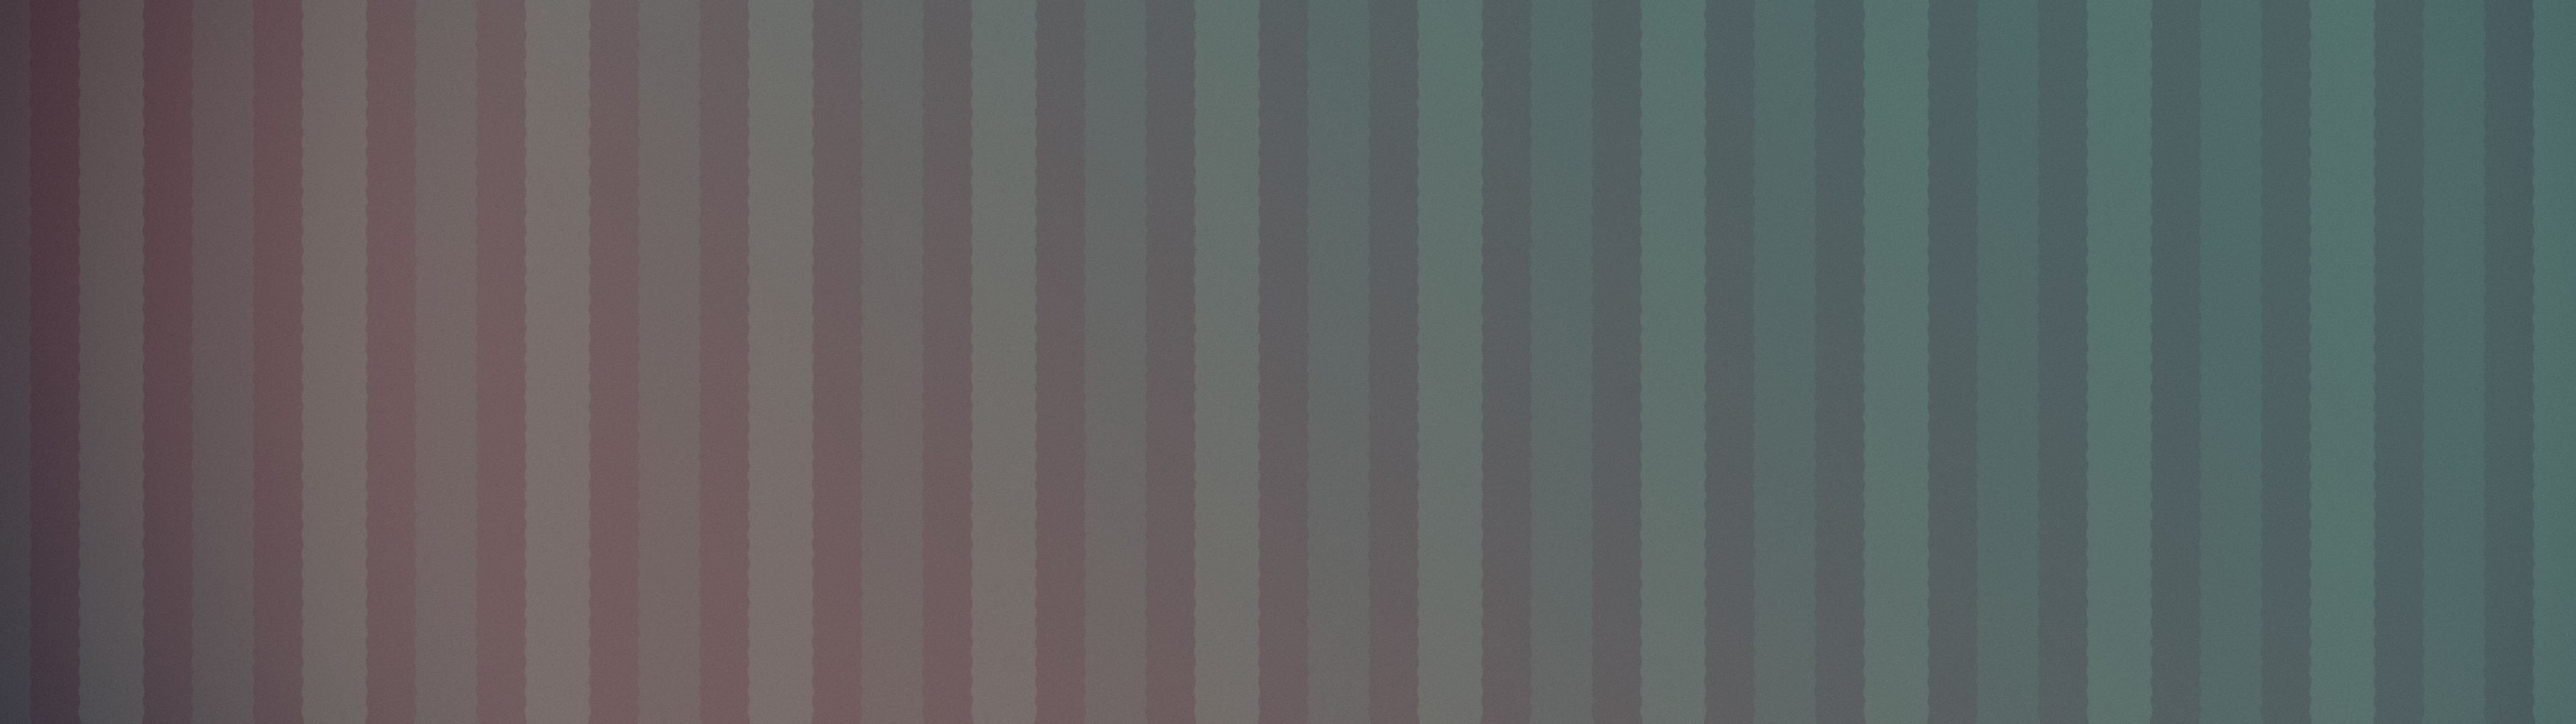 General 3840x1080 multiple display abstract lines